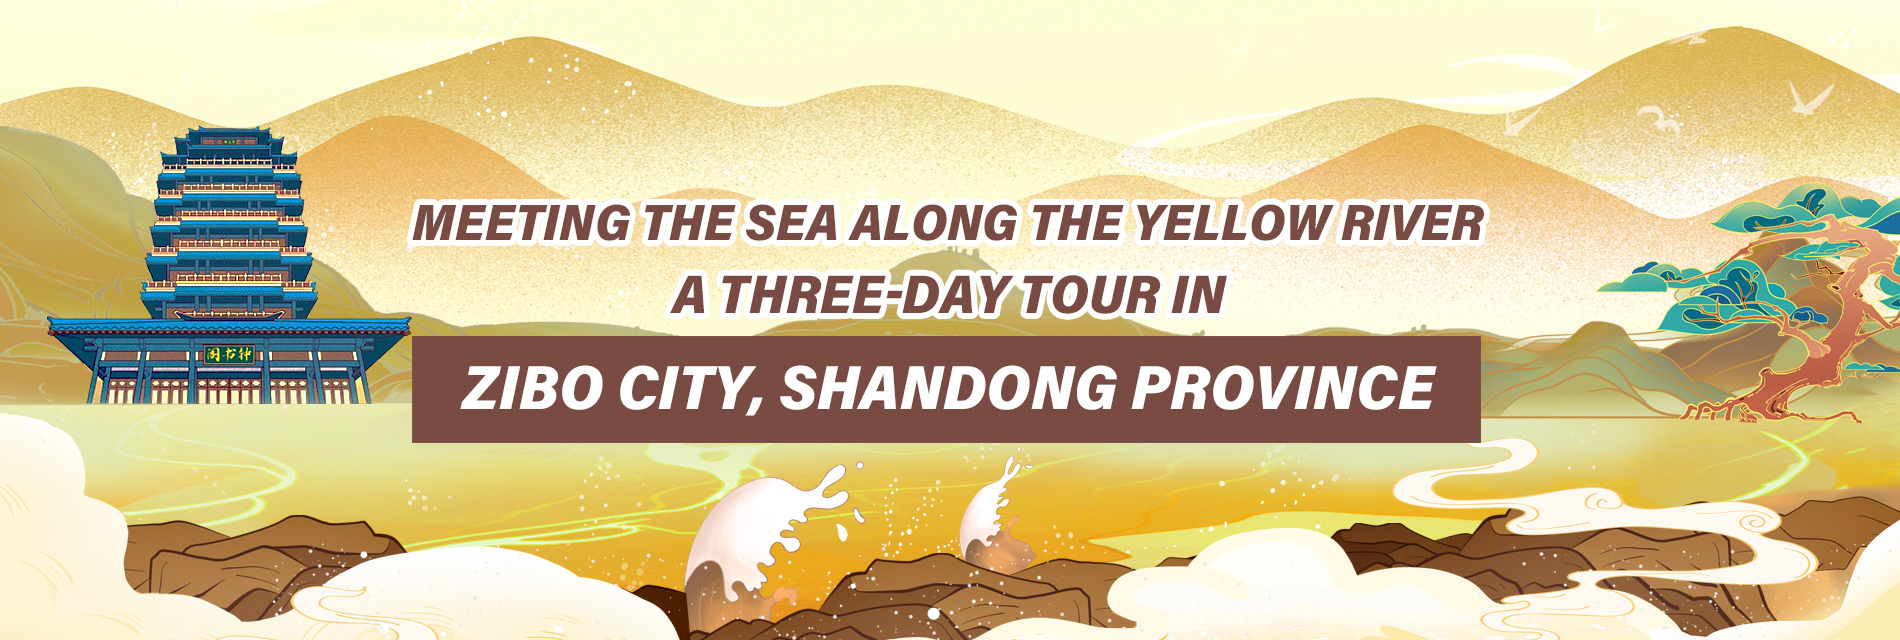 Meeting the Sea along the Yellow River: A Three-day Tour in Zibo